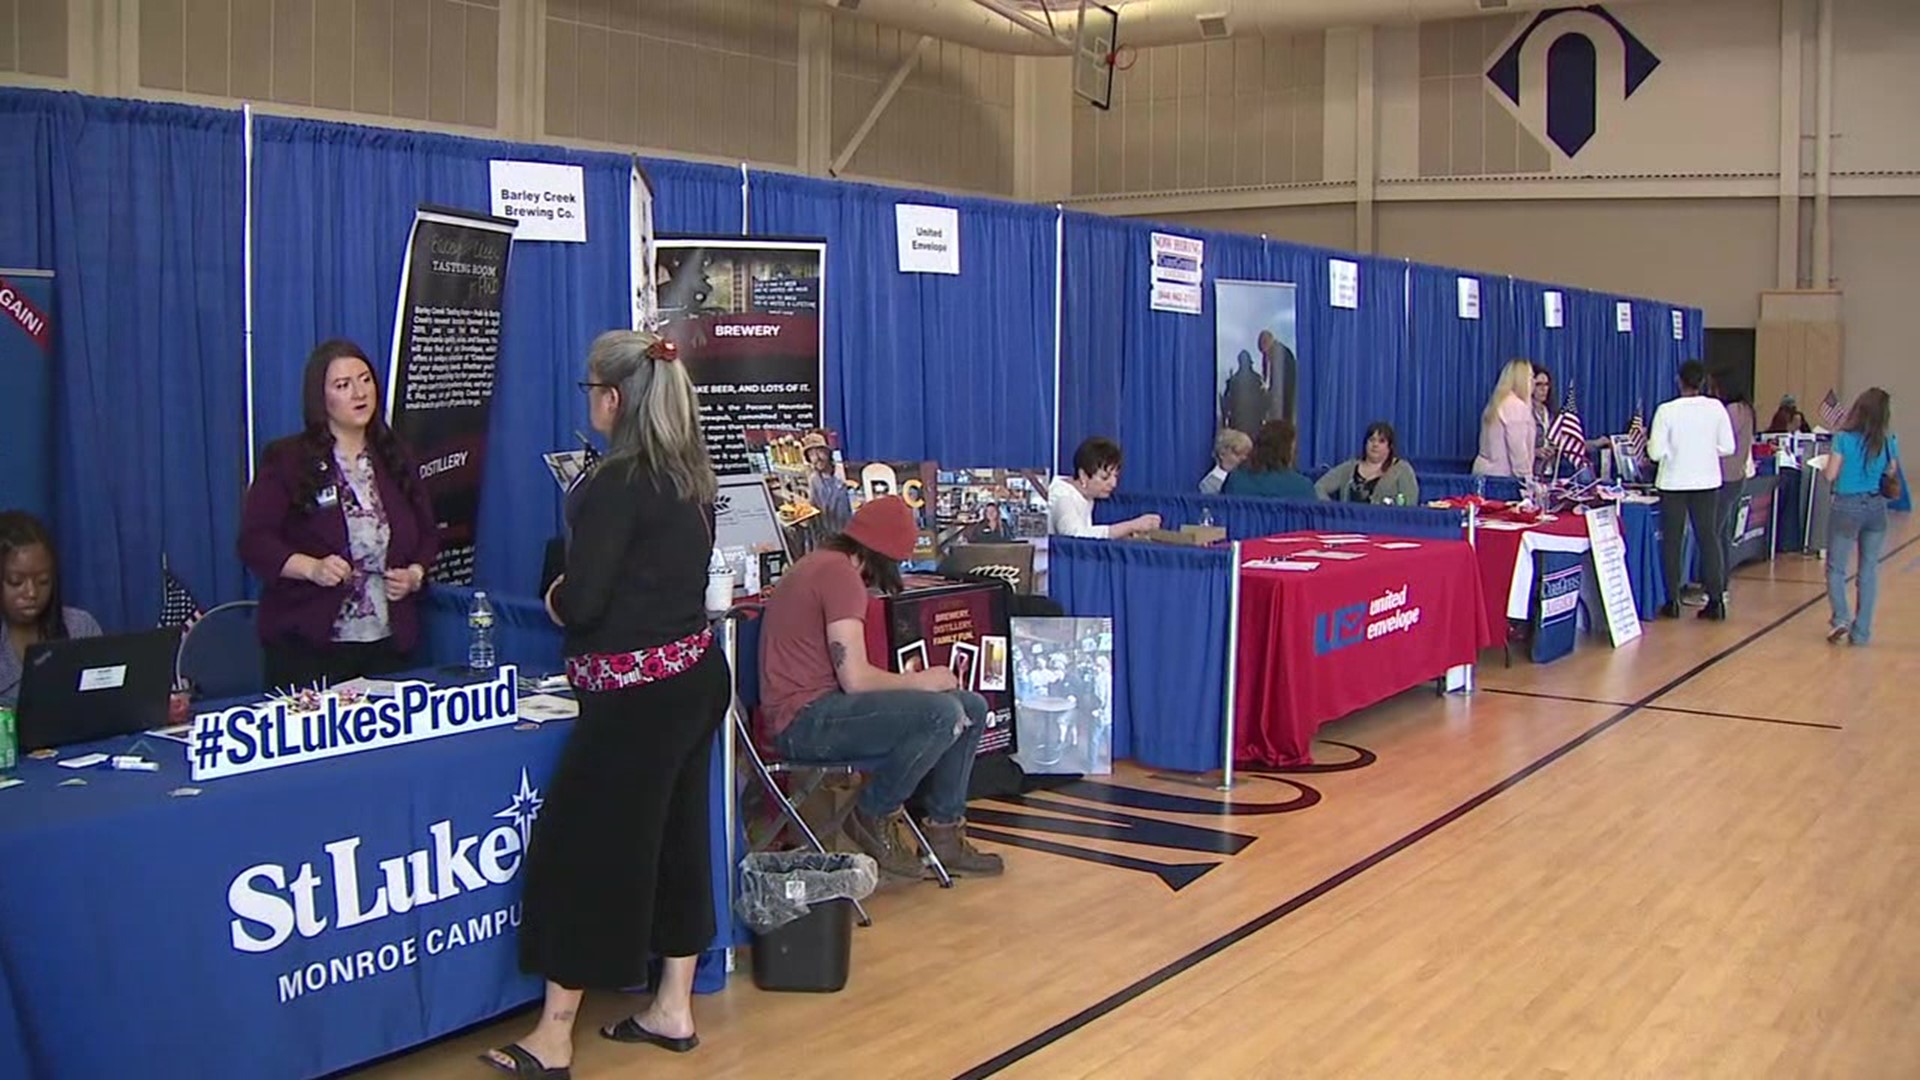 As Newswatch 16's Amanda Eustice reports, more than 50 different businesses and organizations were on hand, looking to fill hundreds of open positions.